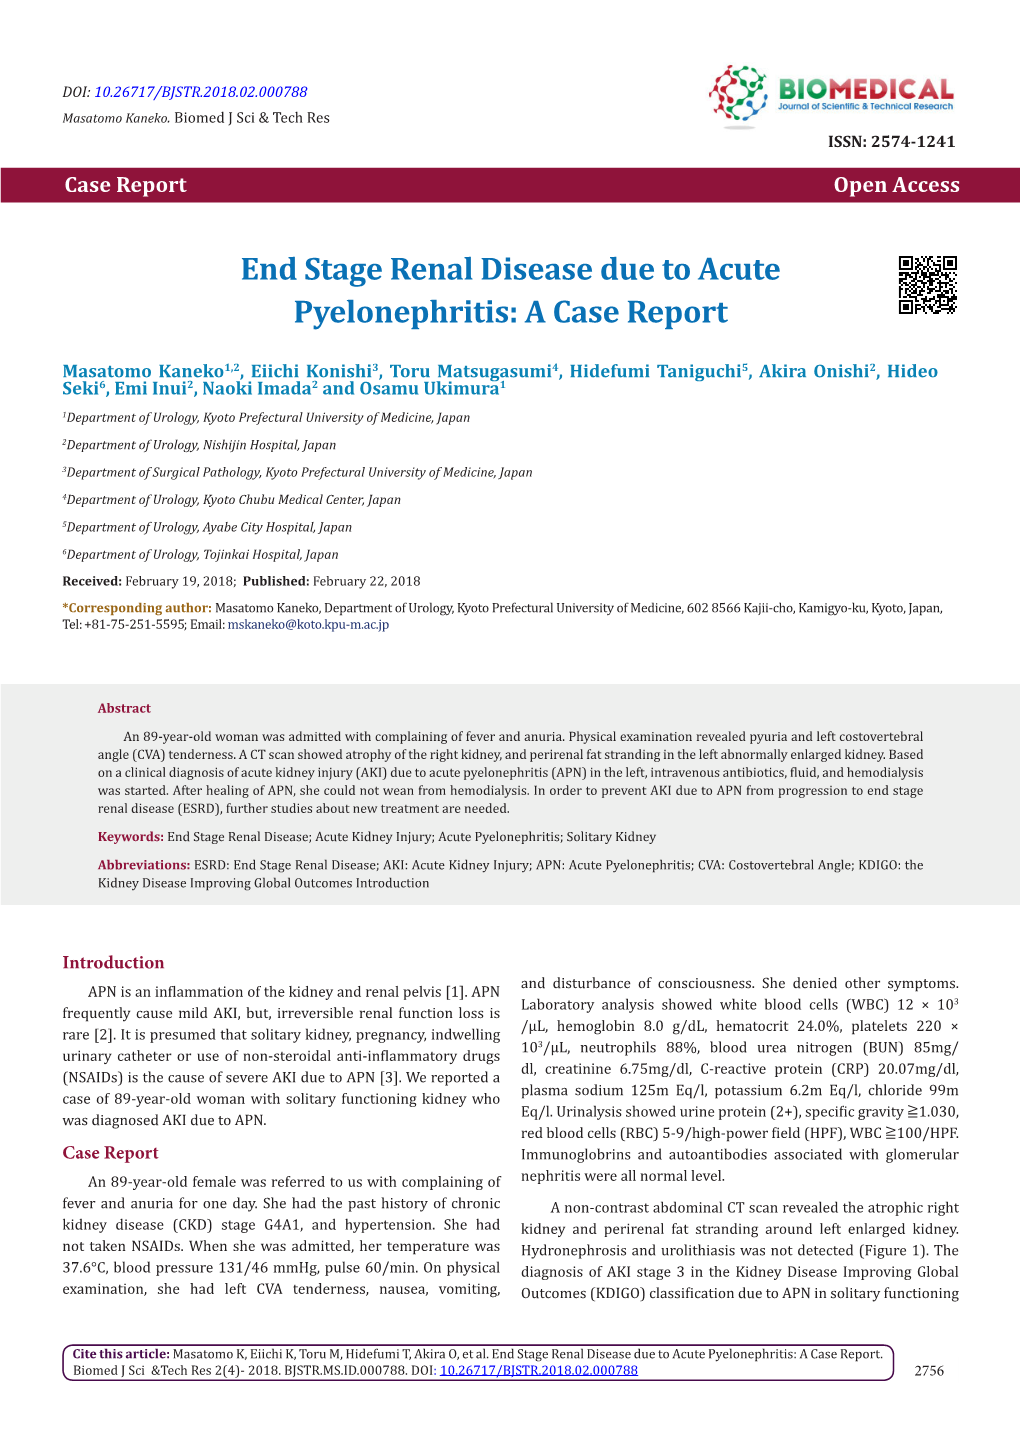 End Stage Renal Disease Due to Acute Pyelonephritis: a Case Report